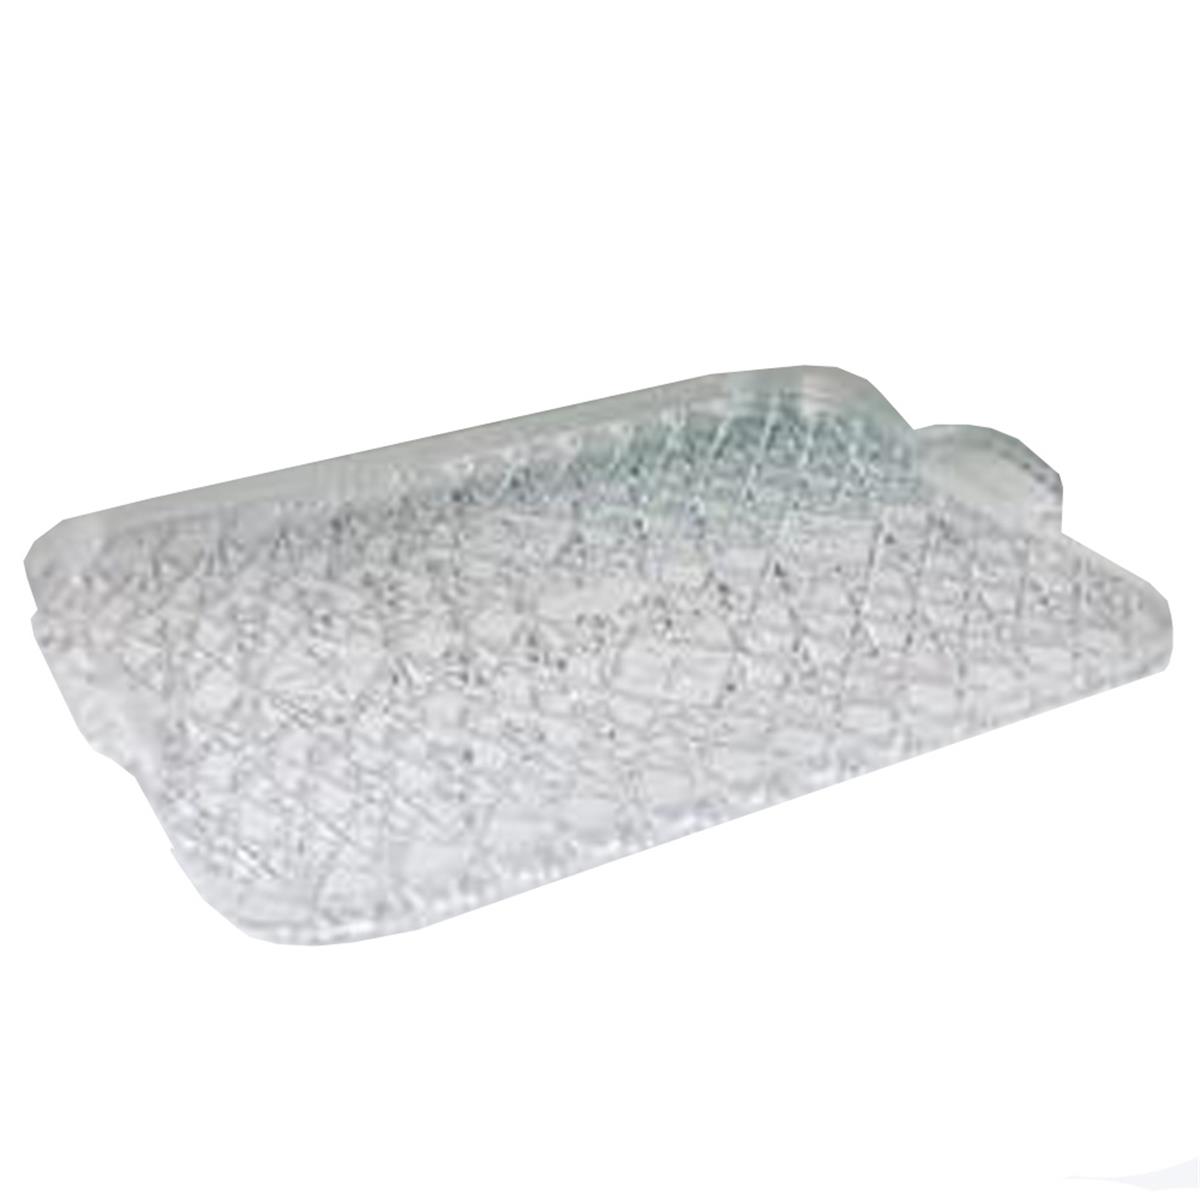 Mpi1913 Pe 19 X 13 In. Clear Crystalware Rectangular Tray With Handle - Case Of 6